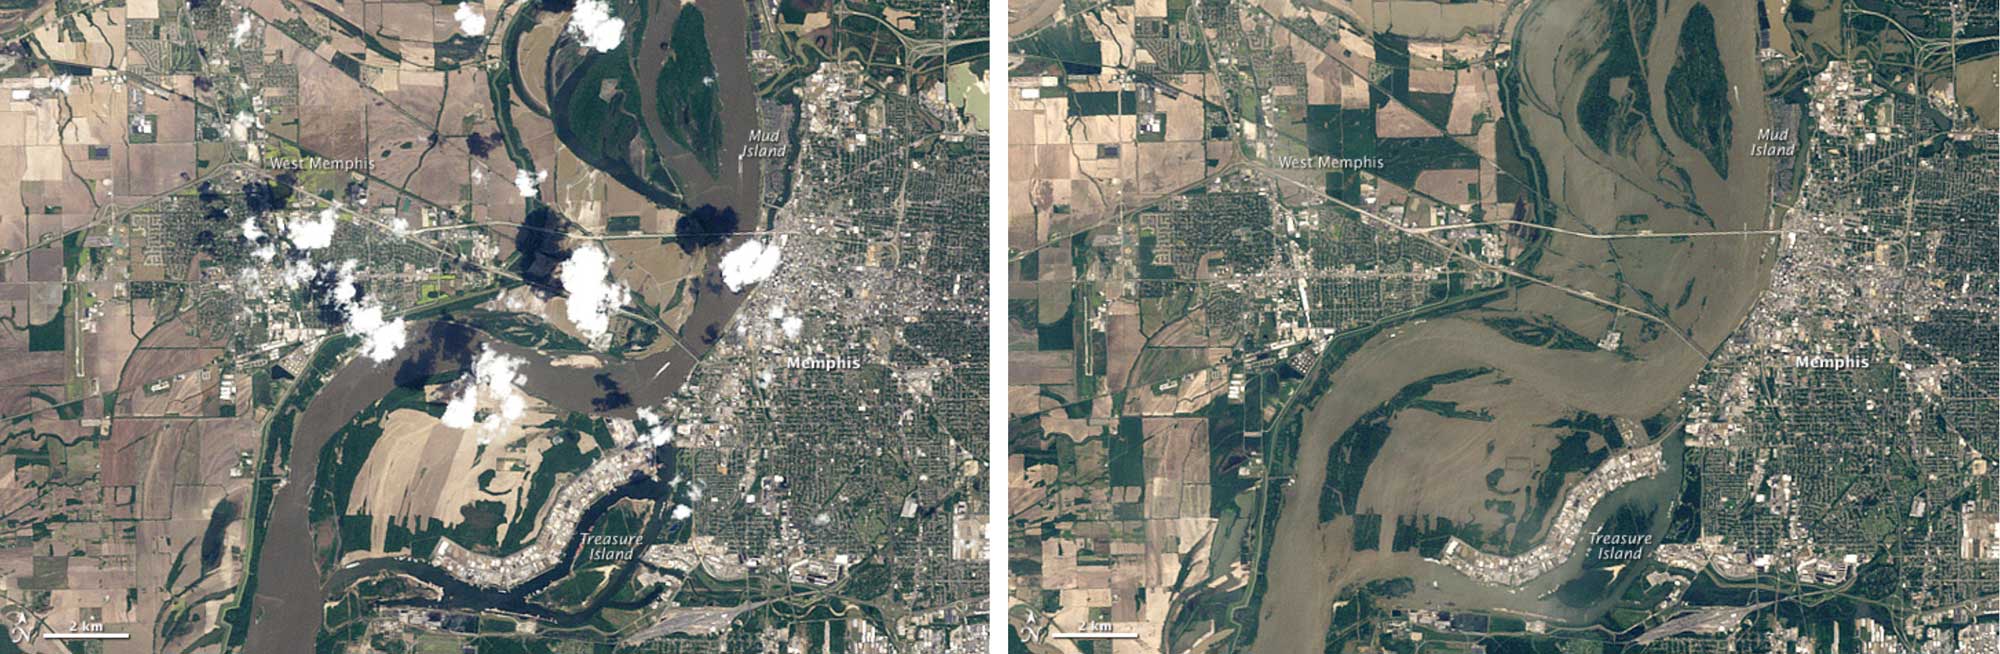 Two satellite images of the area around Memphis before and after the flooding of May 2011.